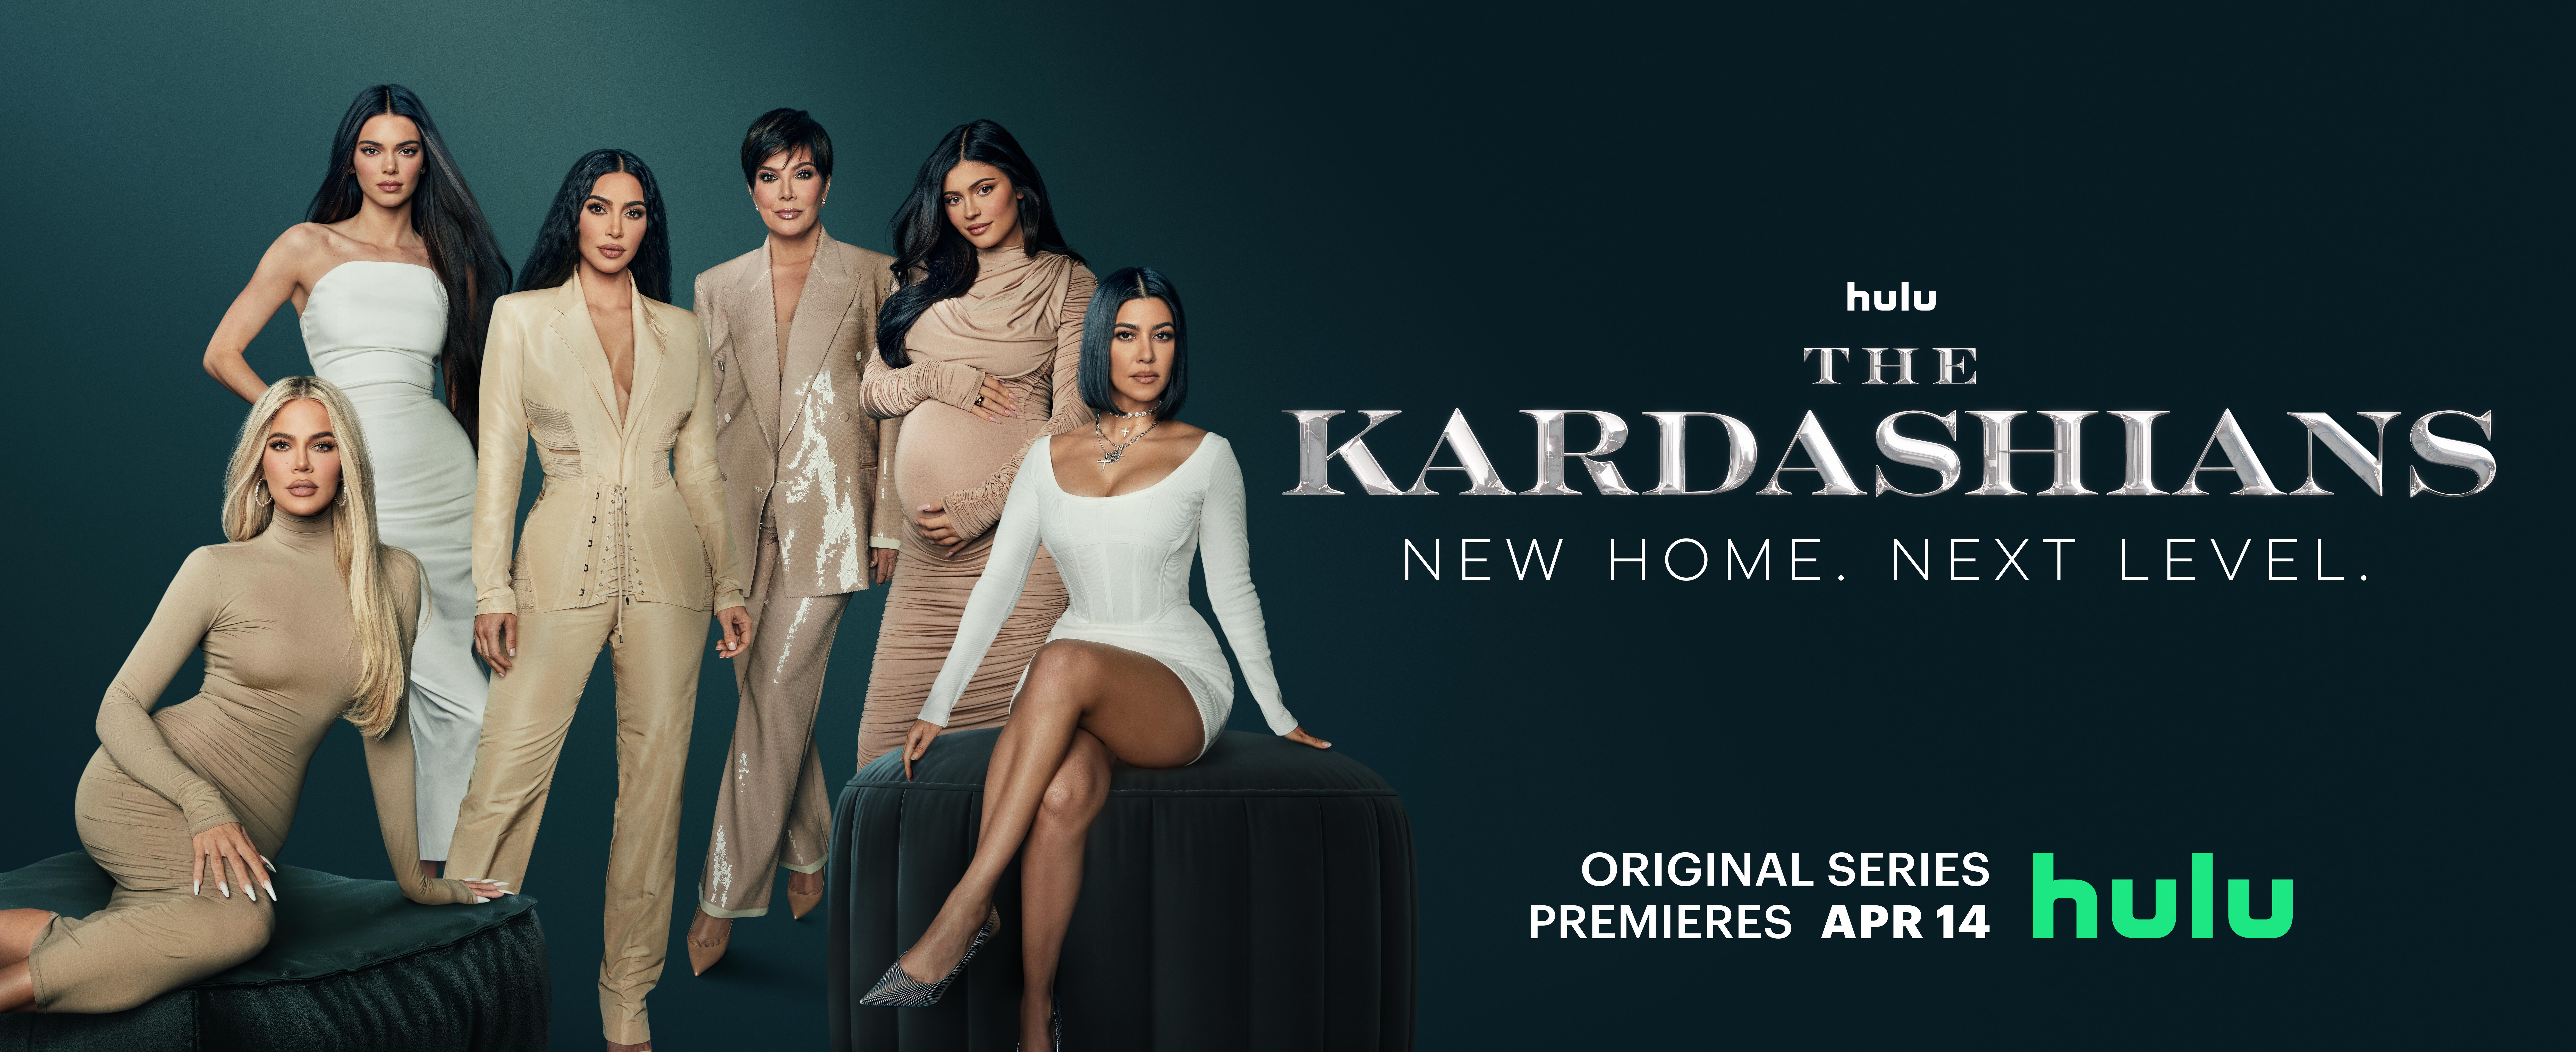 ‘The Kardashians’: When to Watch Hulu’s New Show Starring the Famous Family